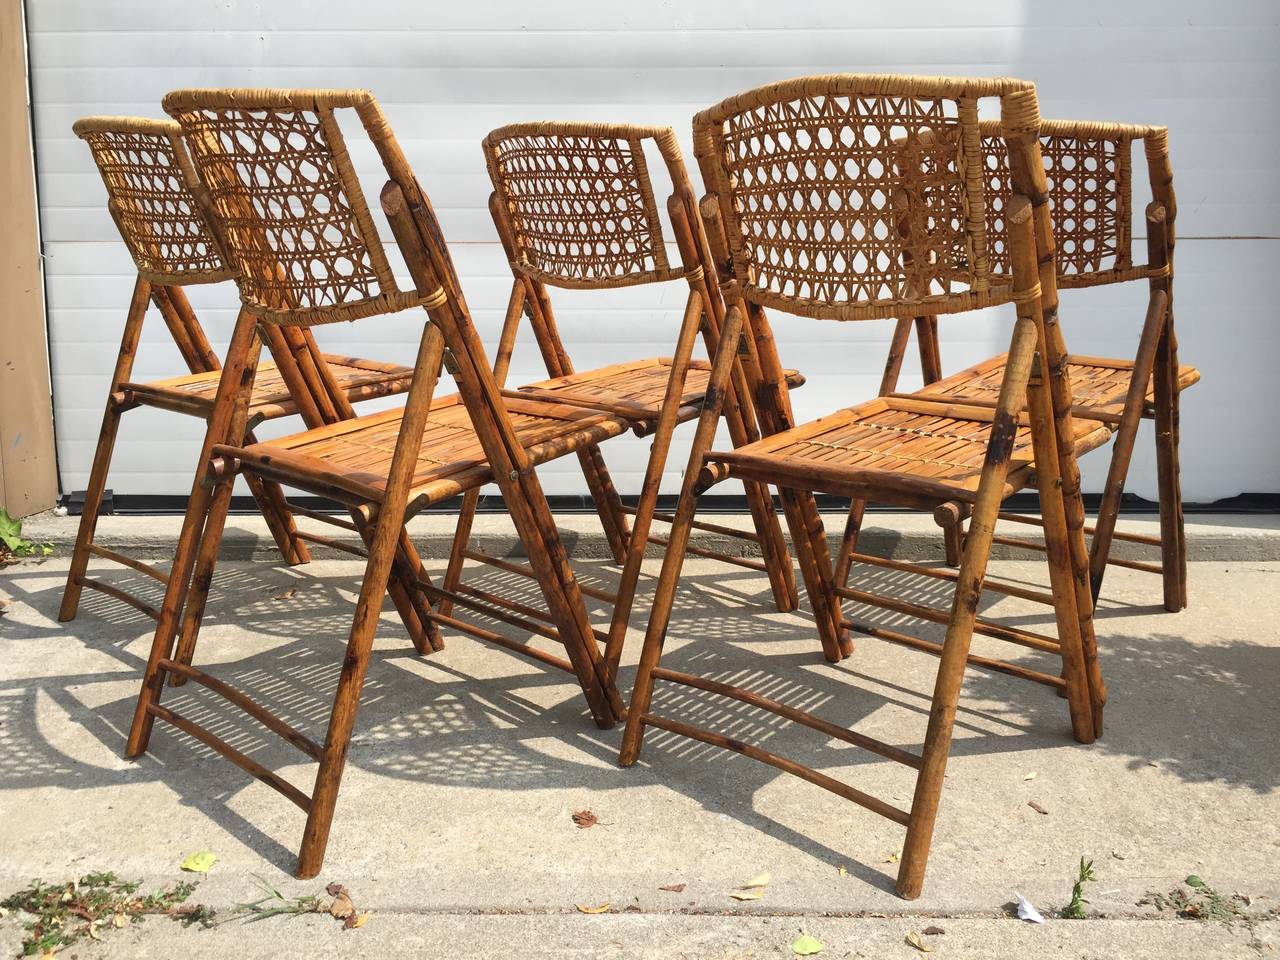 Set of Five Scorched Bamboo Frame Folding Chairs with Rattan Seat and Back 3